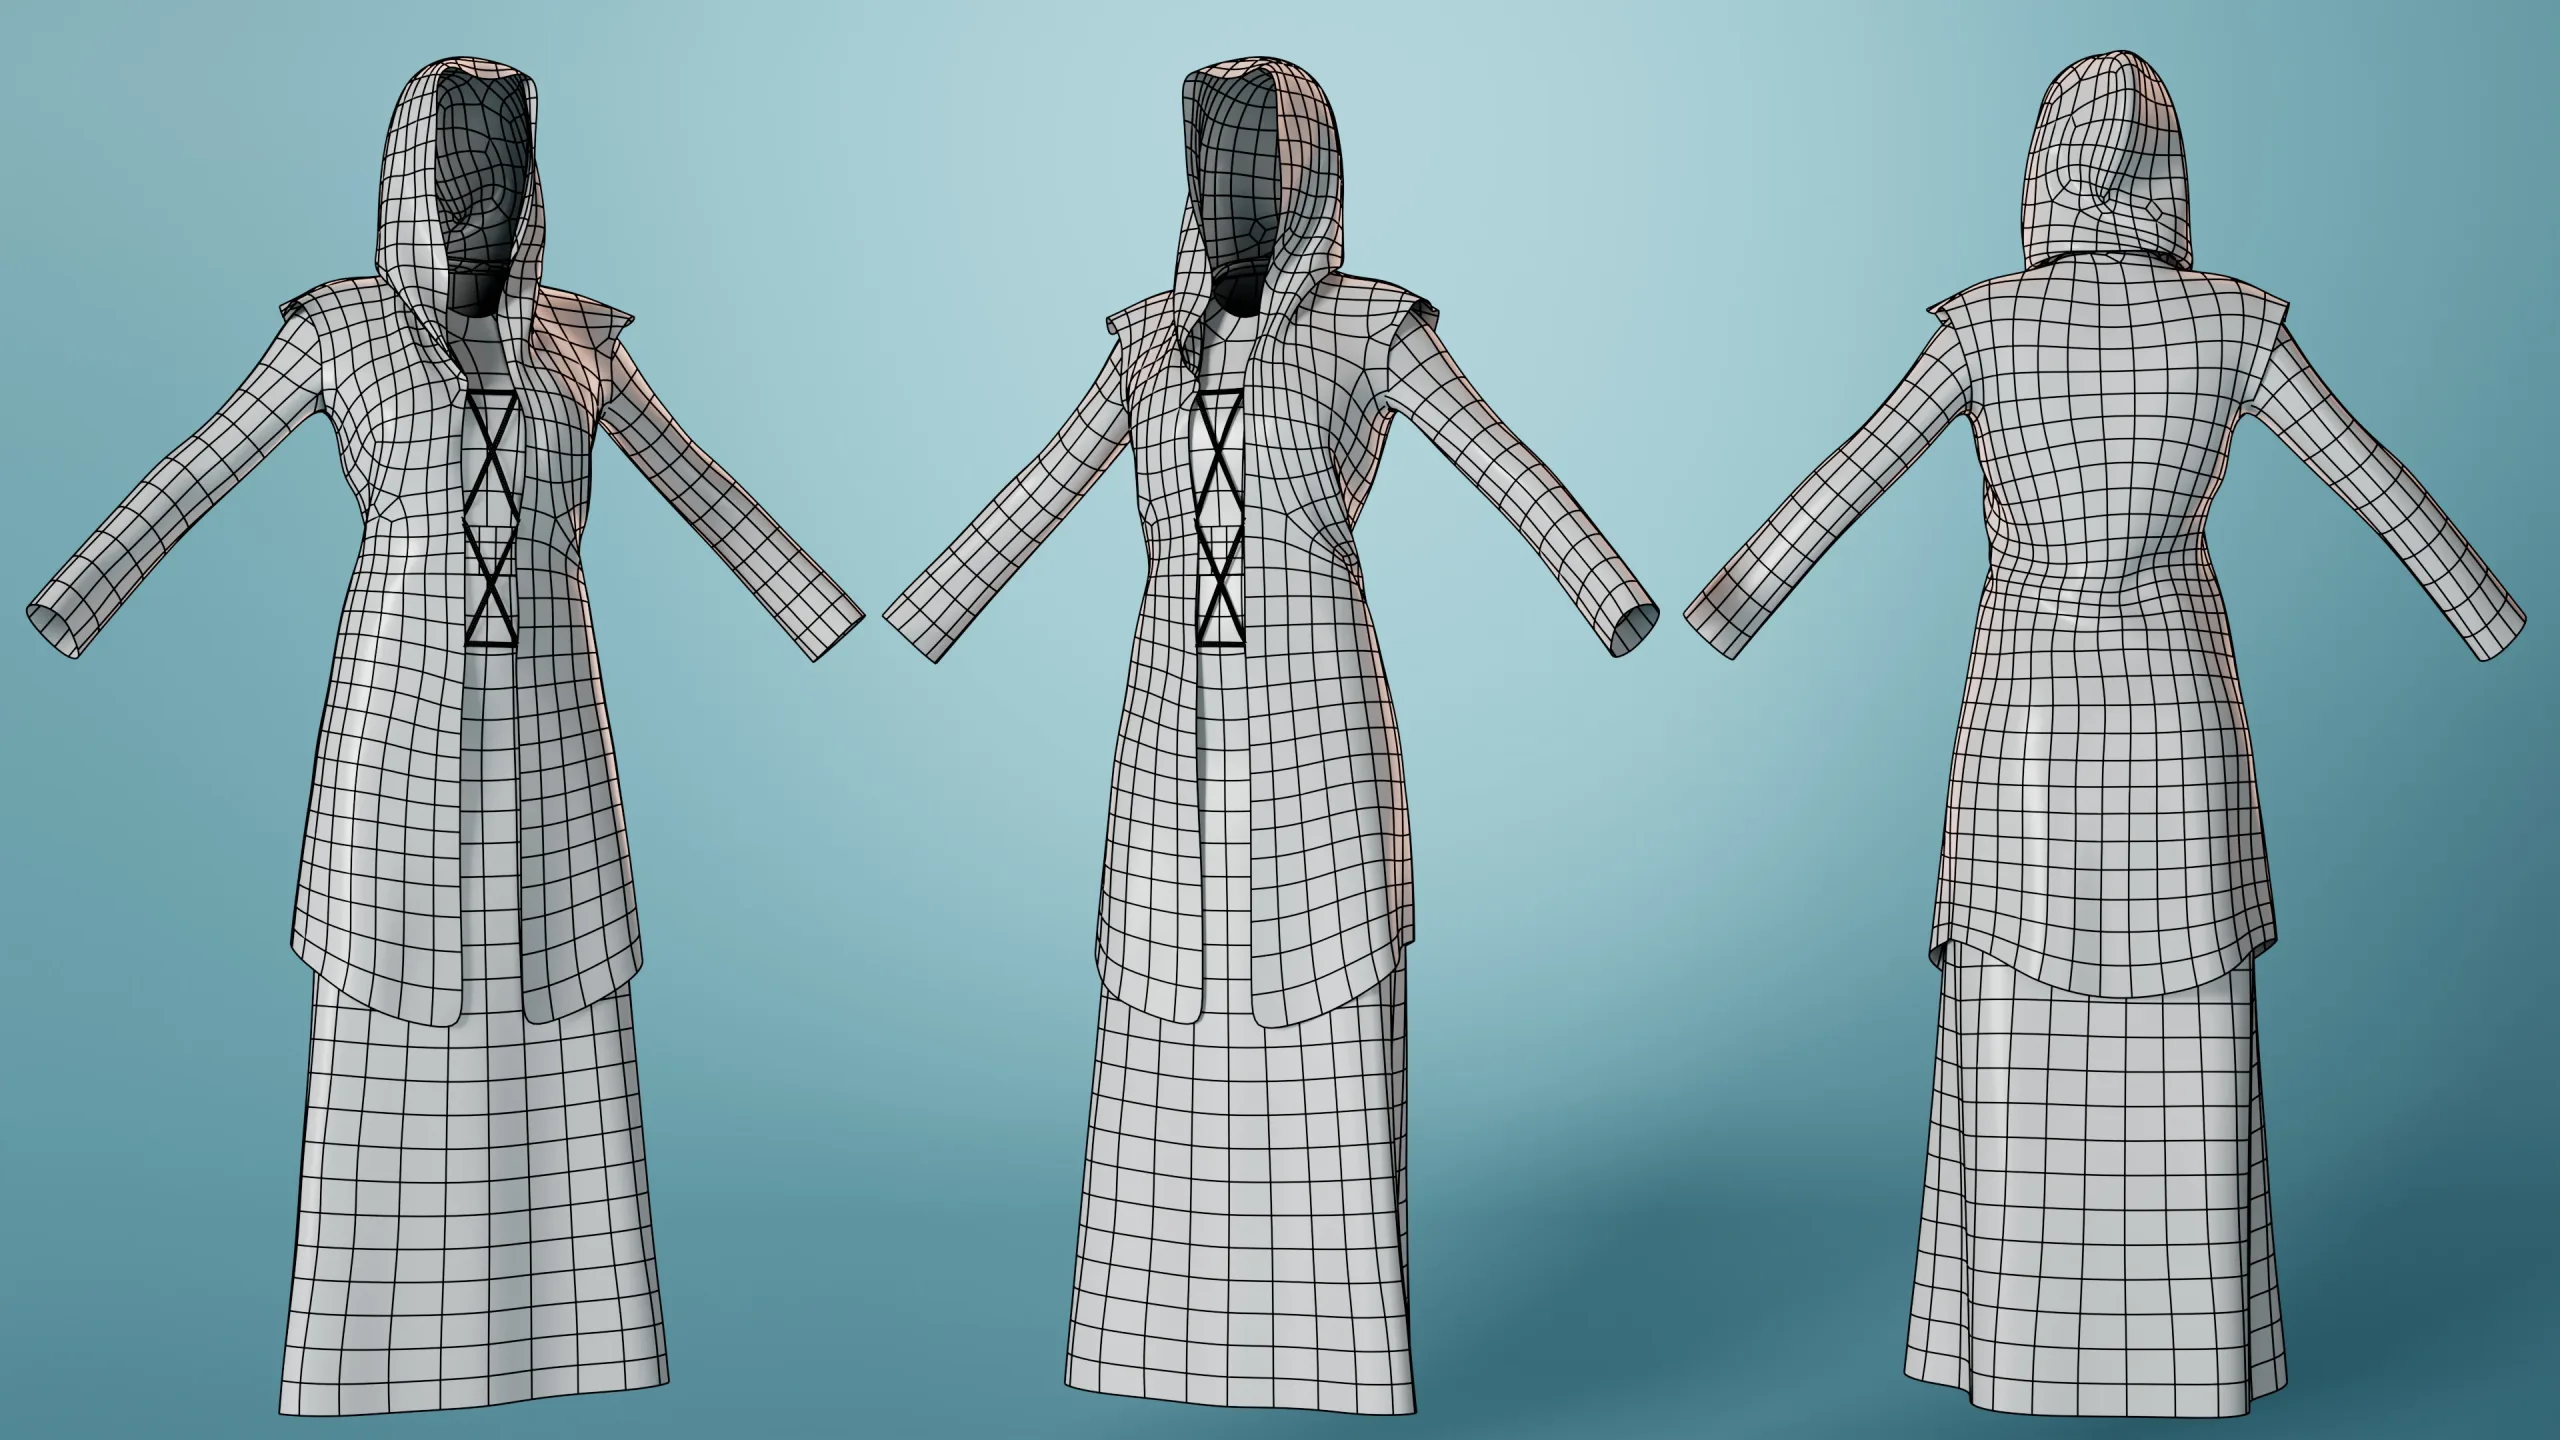 6 Male & Female Adventurer Clothes - Basemesh Models + Reference Images for texturing + Bonus + Project Files